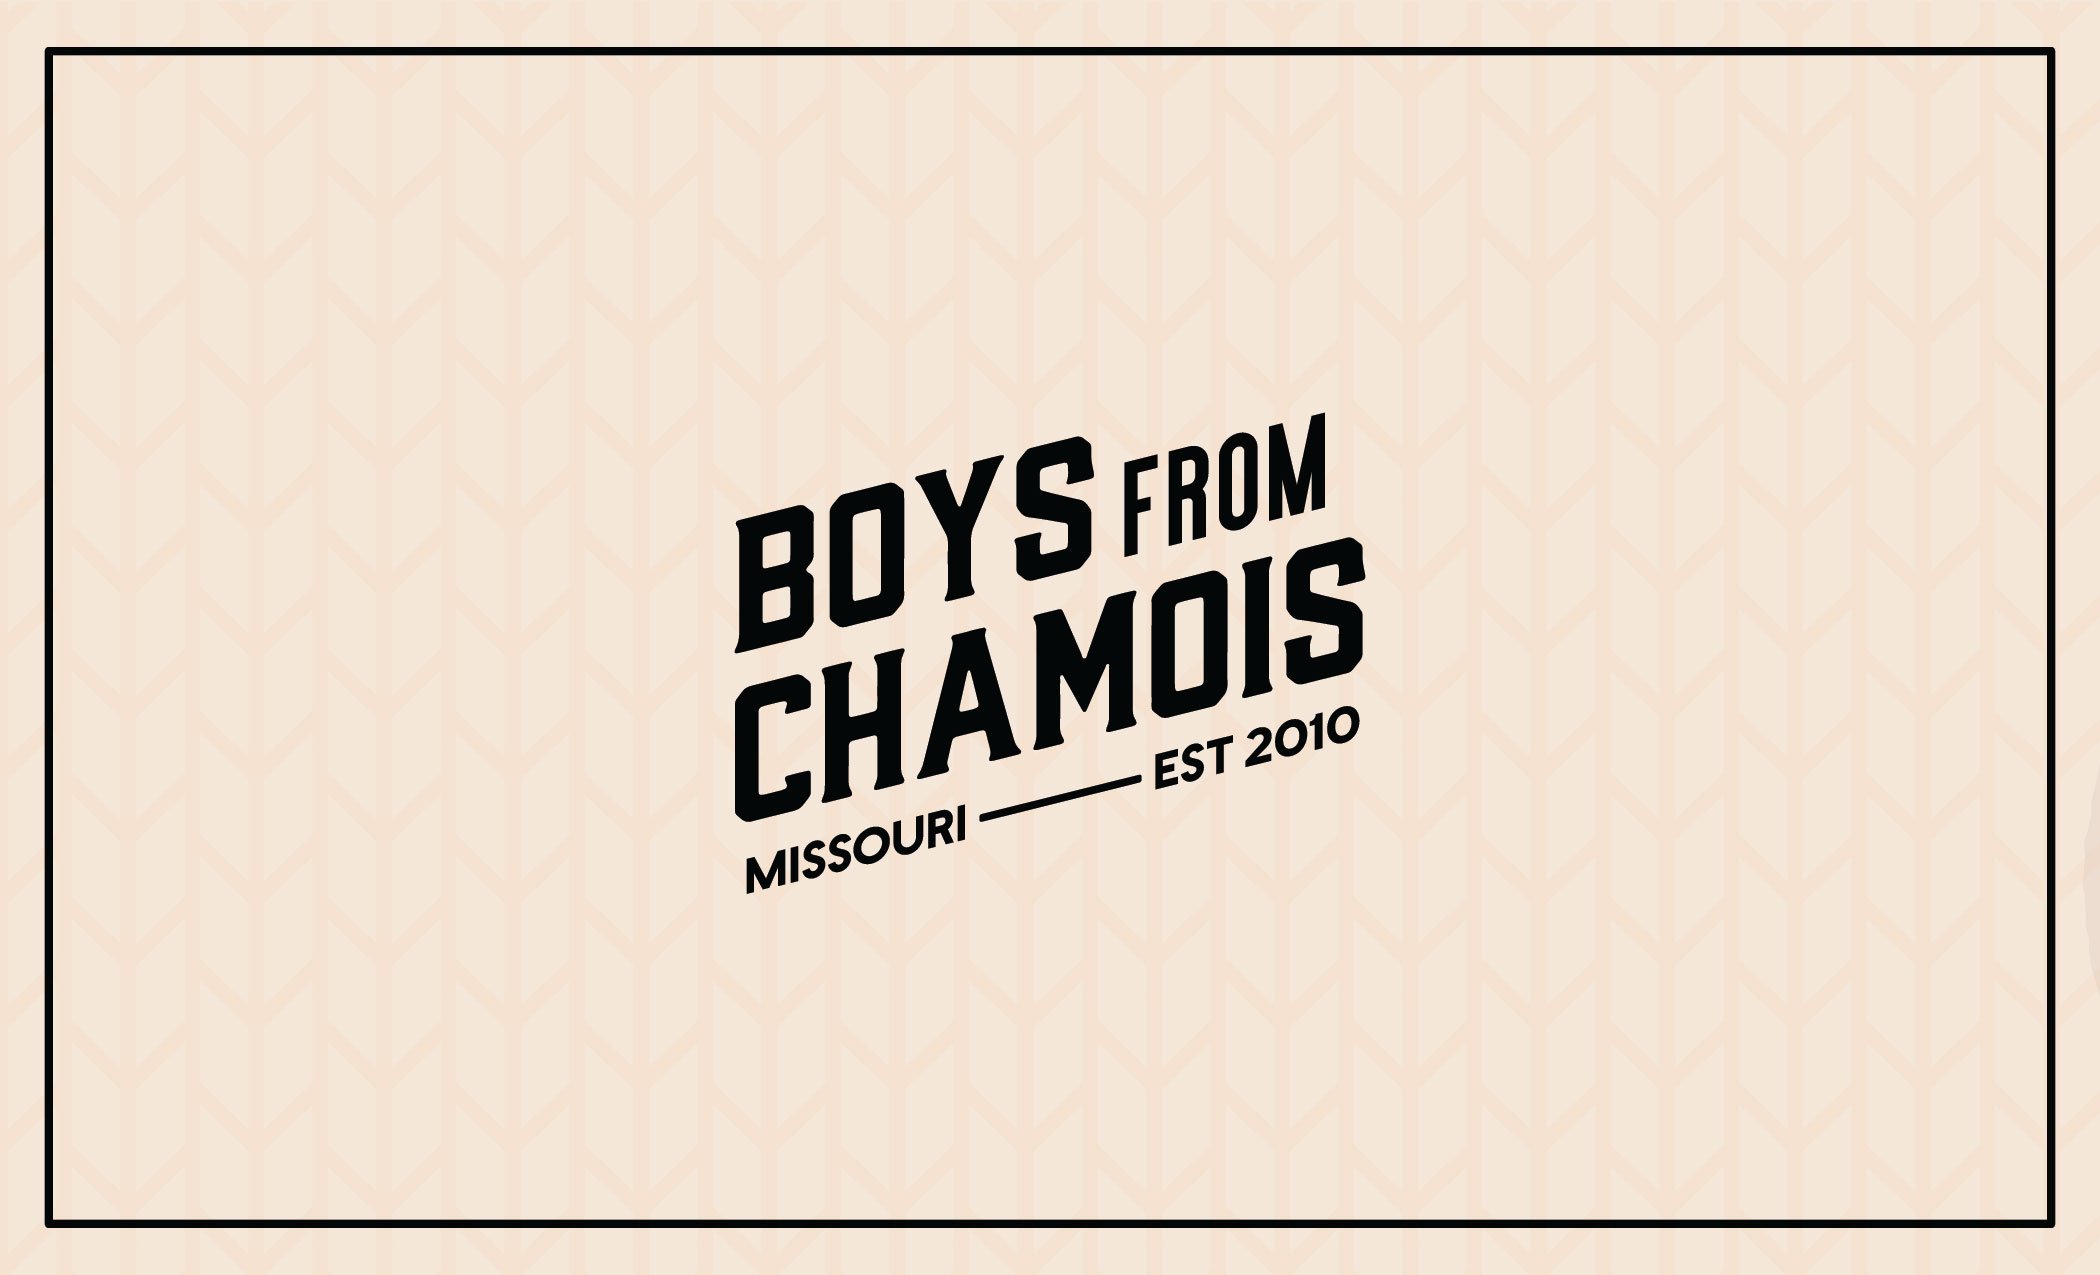  Boys from Chamois logo on tan background. 